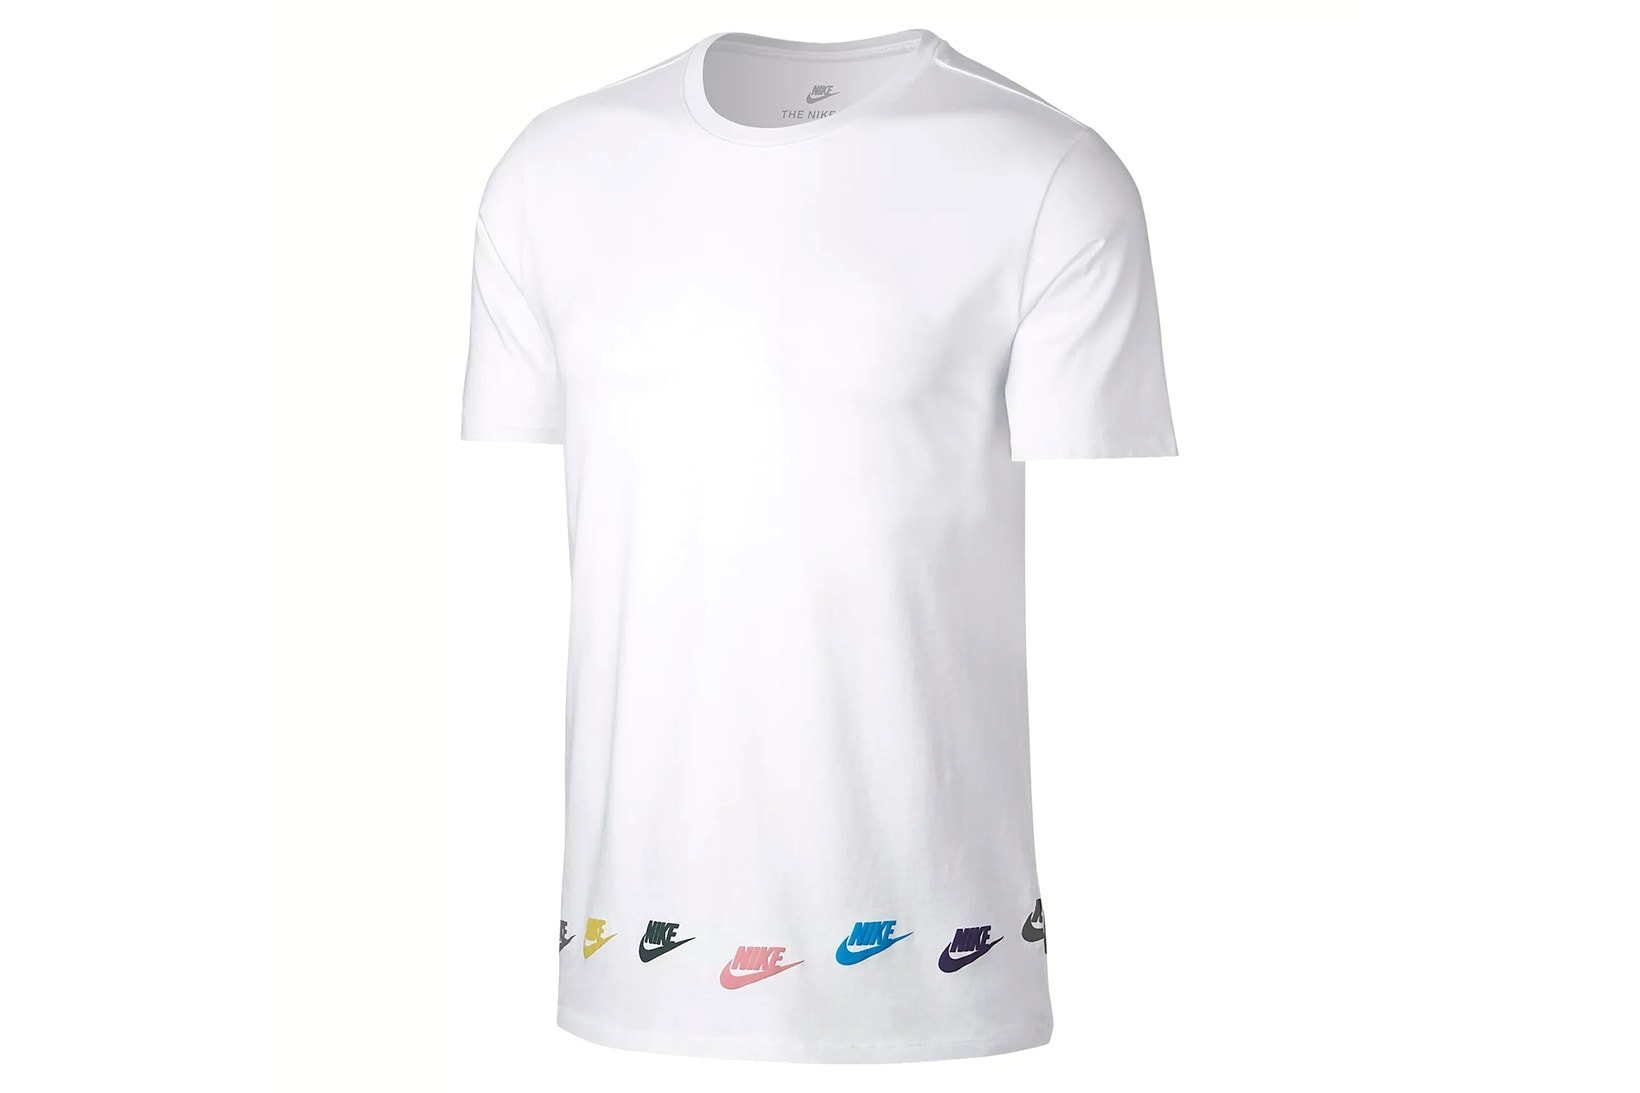 Sean Wotherspoon Nike Air Max Day 2018 1/97 Apparel T-Shirt Tee Corduroy Release Price